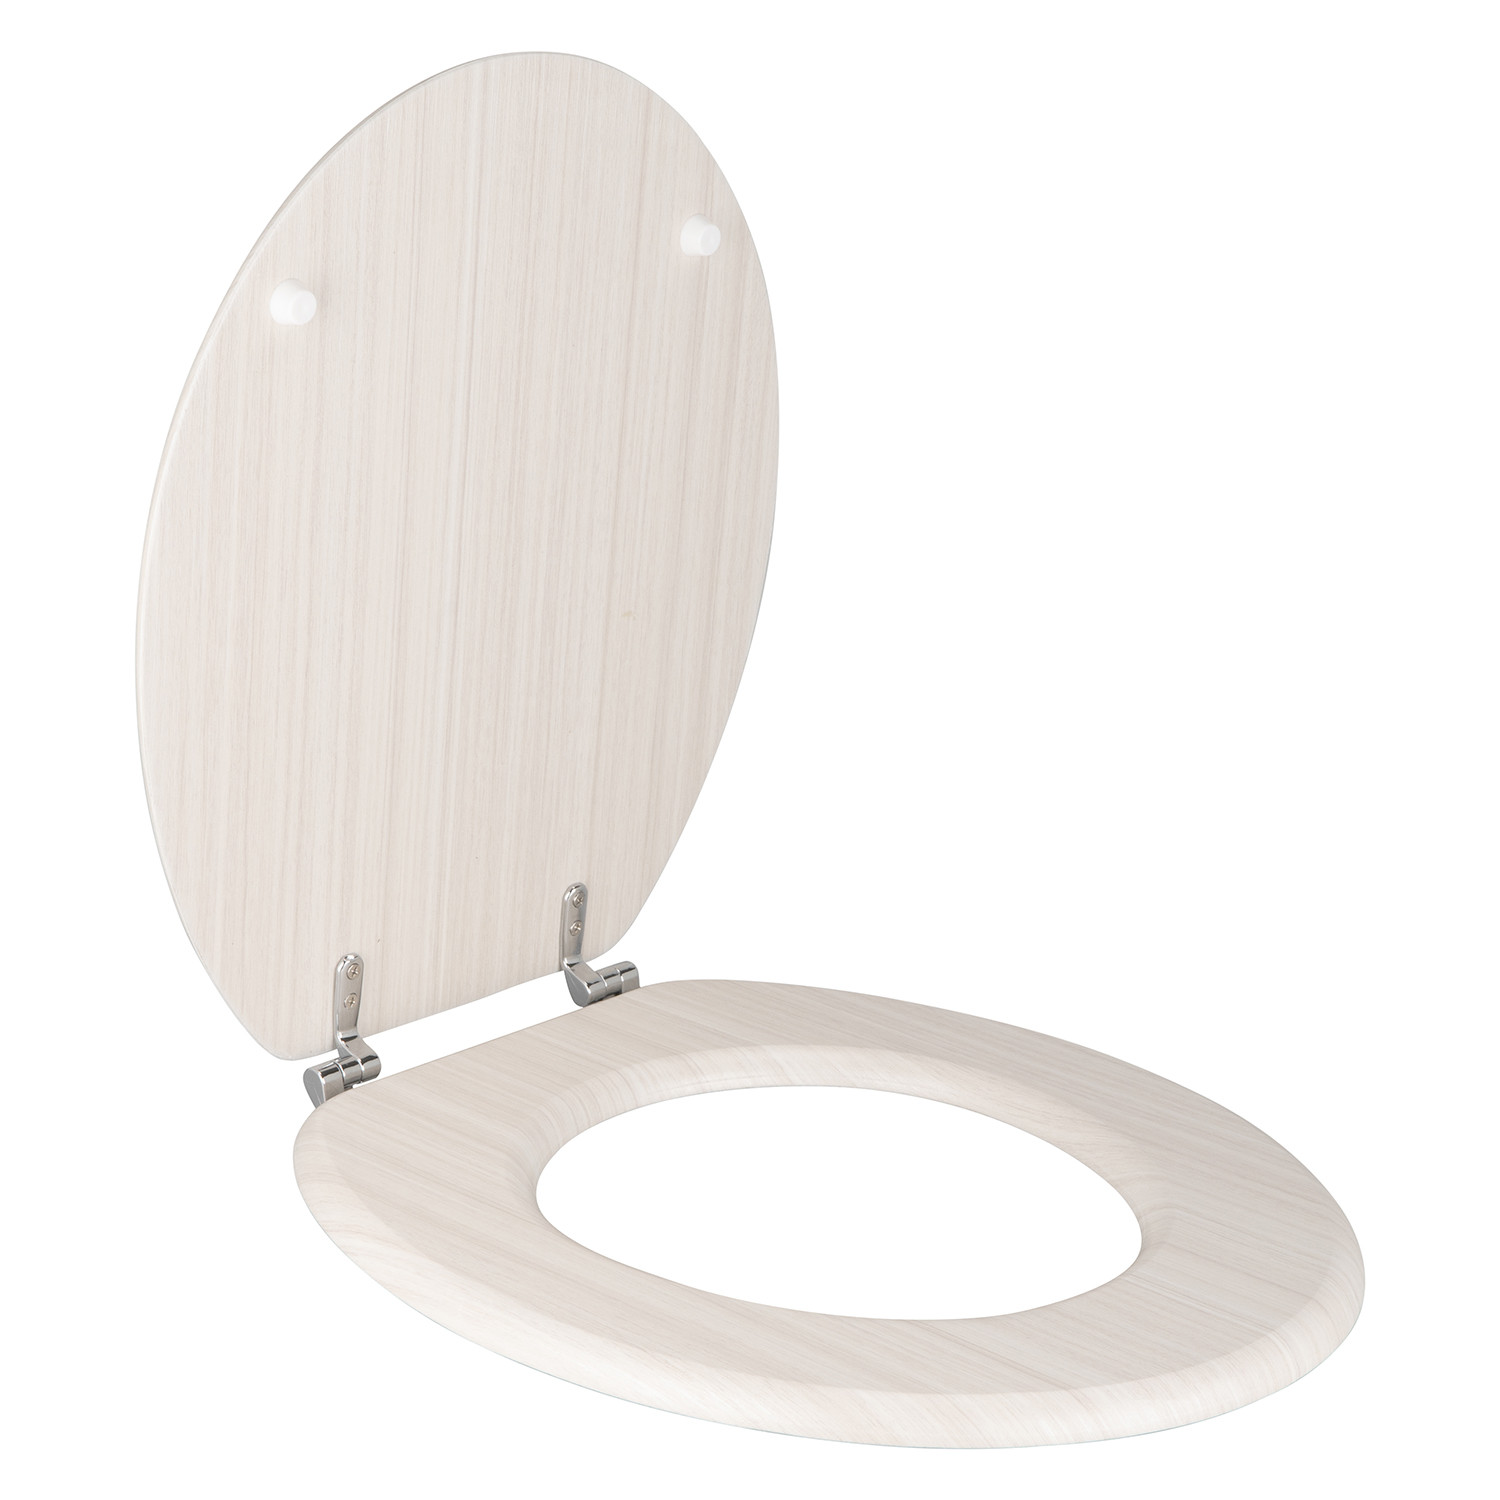 Wooden Effect Toilet Seat - Raw Wood Image 2